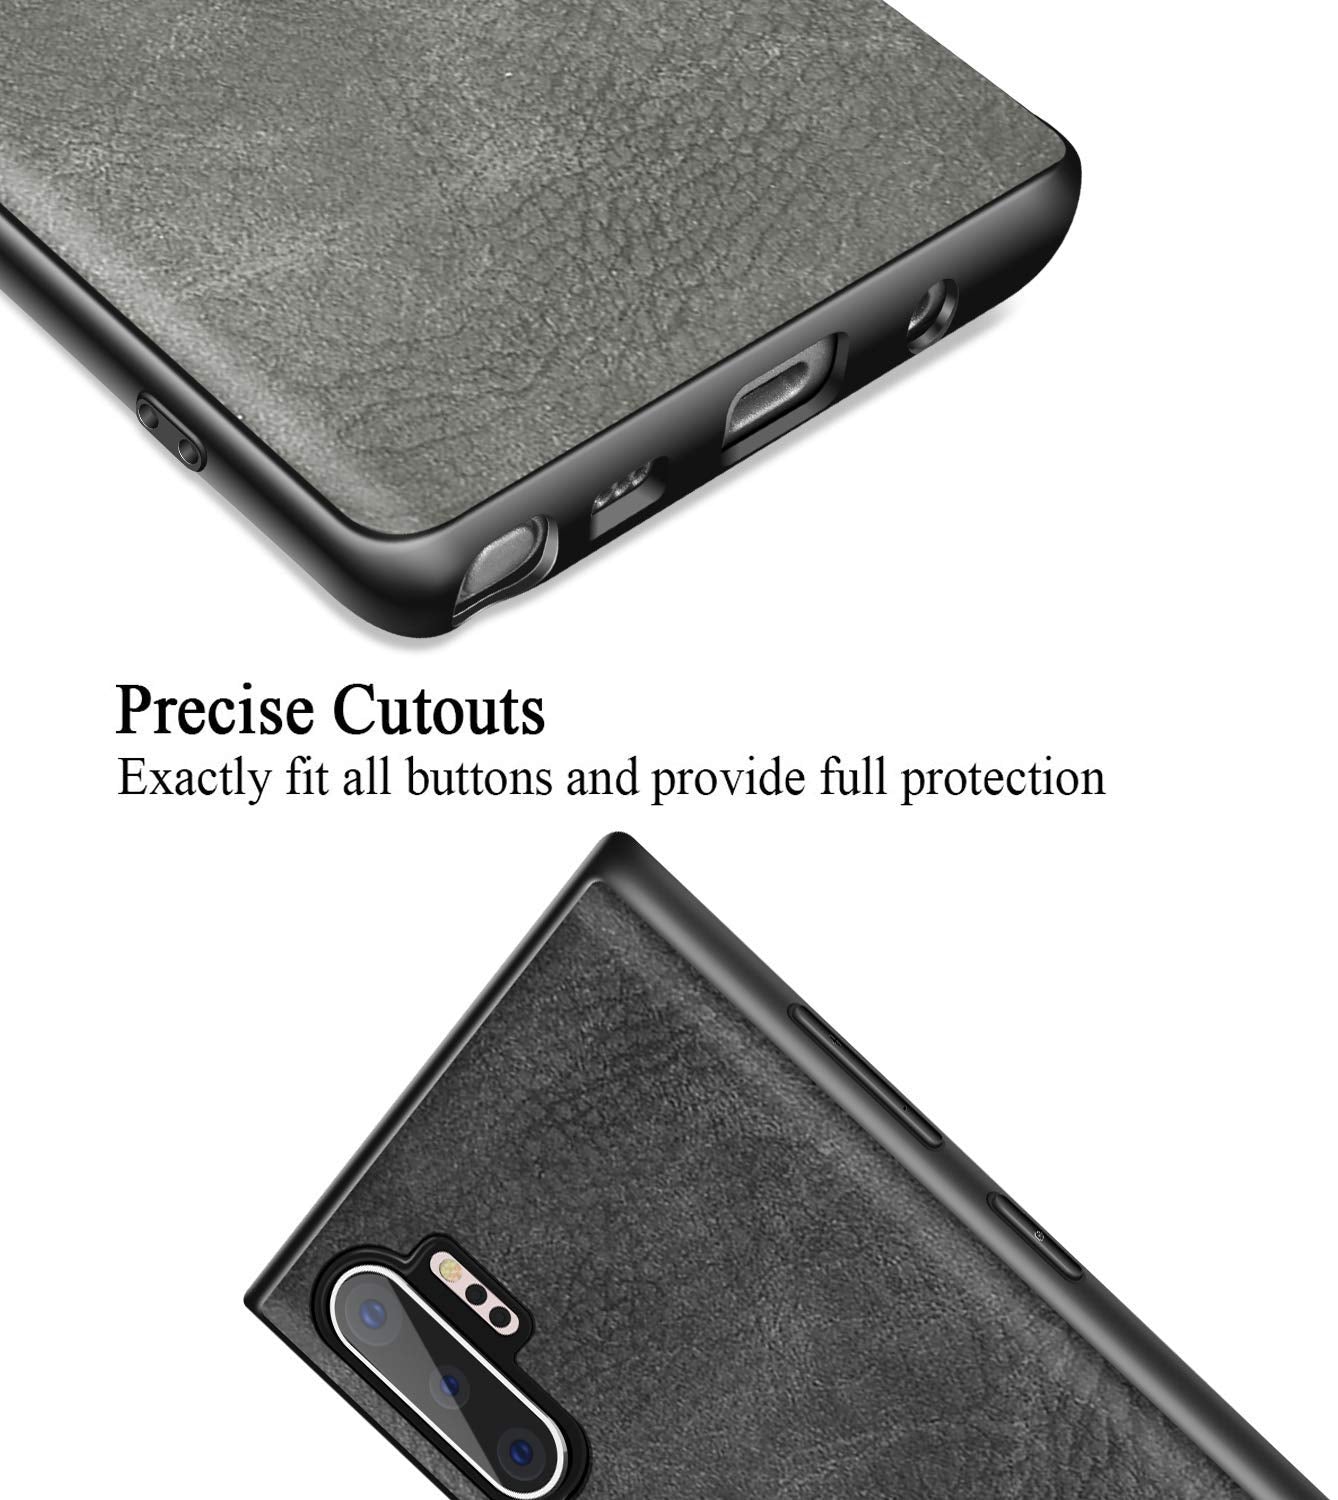 Samsung Galaxy Note 10 Plus full body protection back case cover by Excelsior